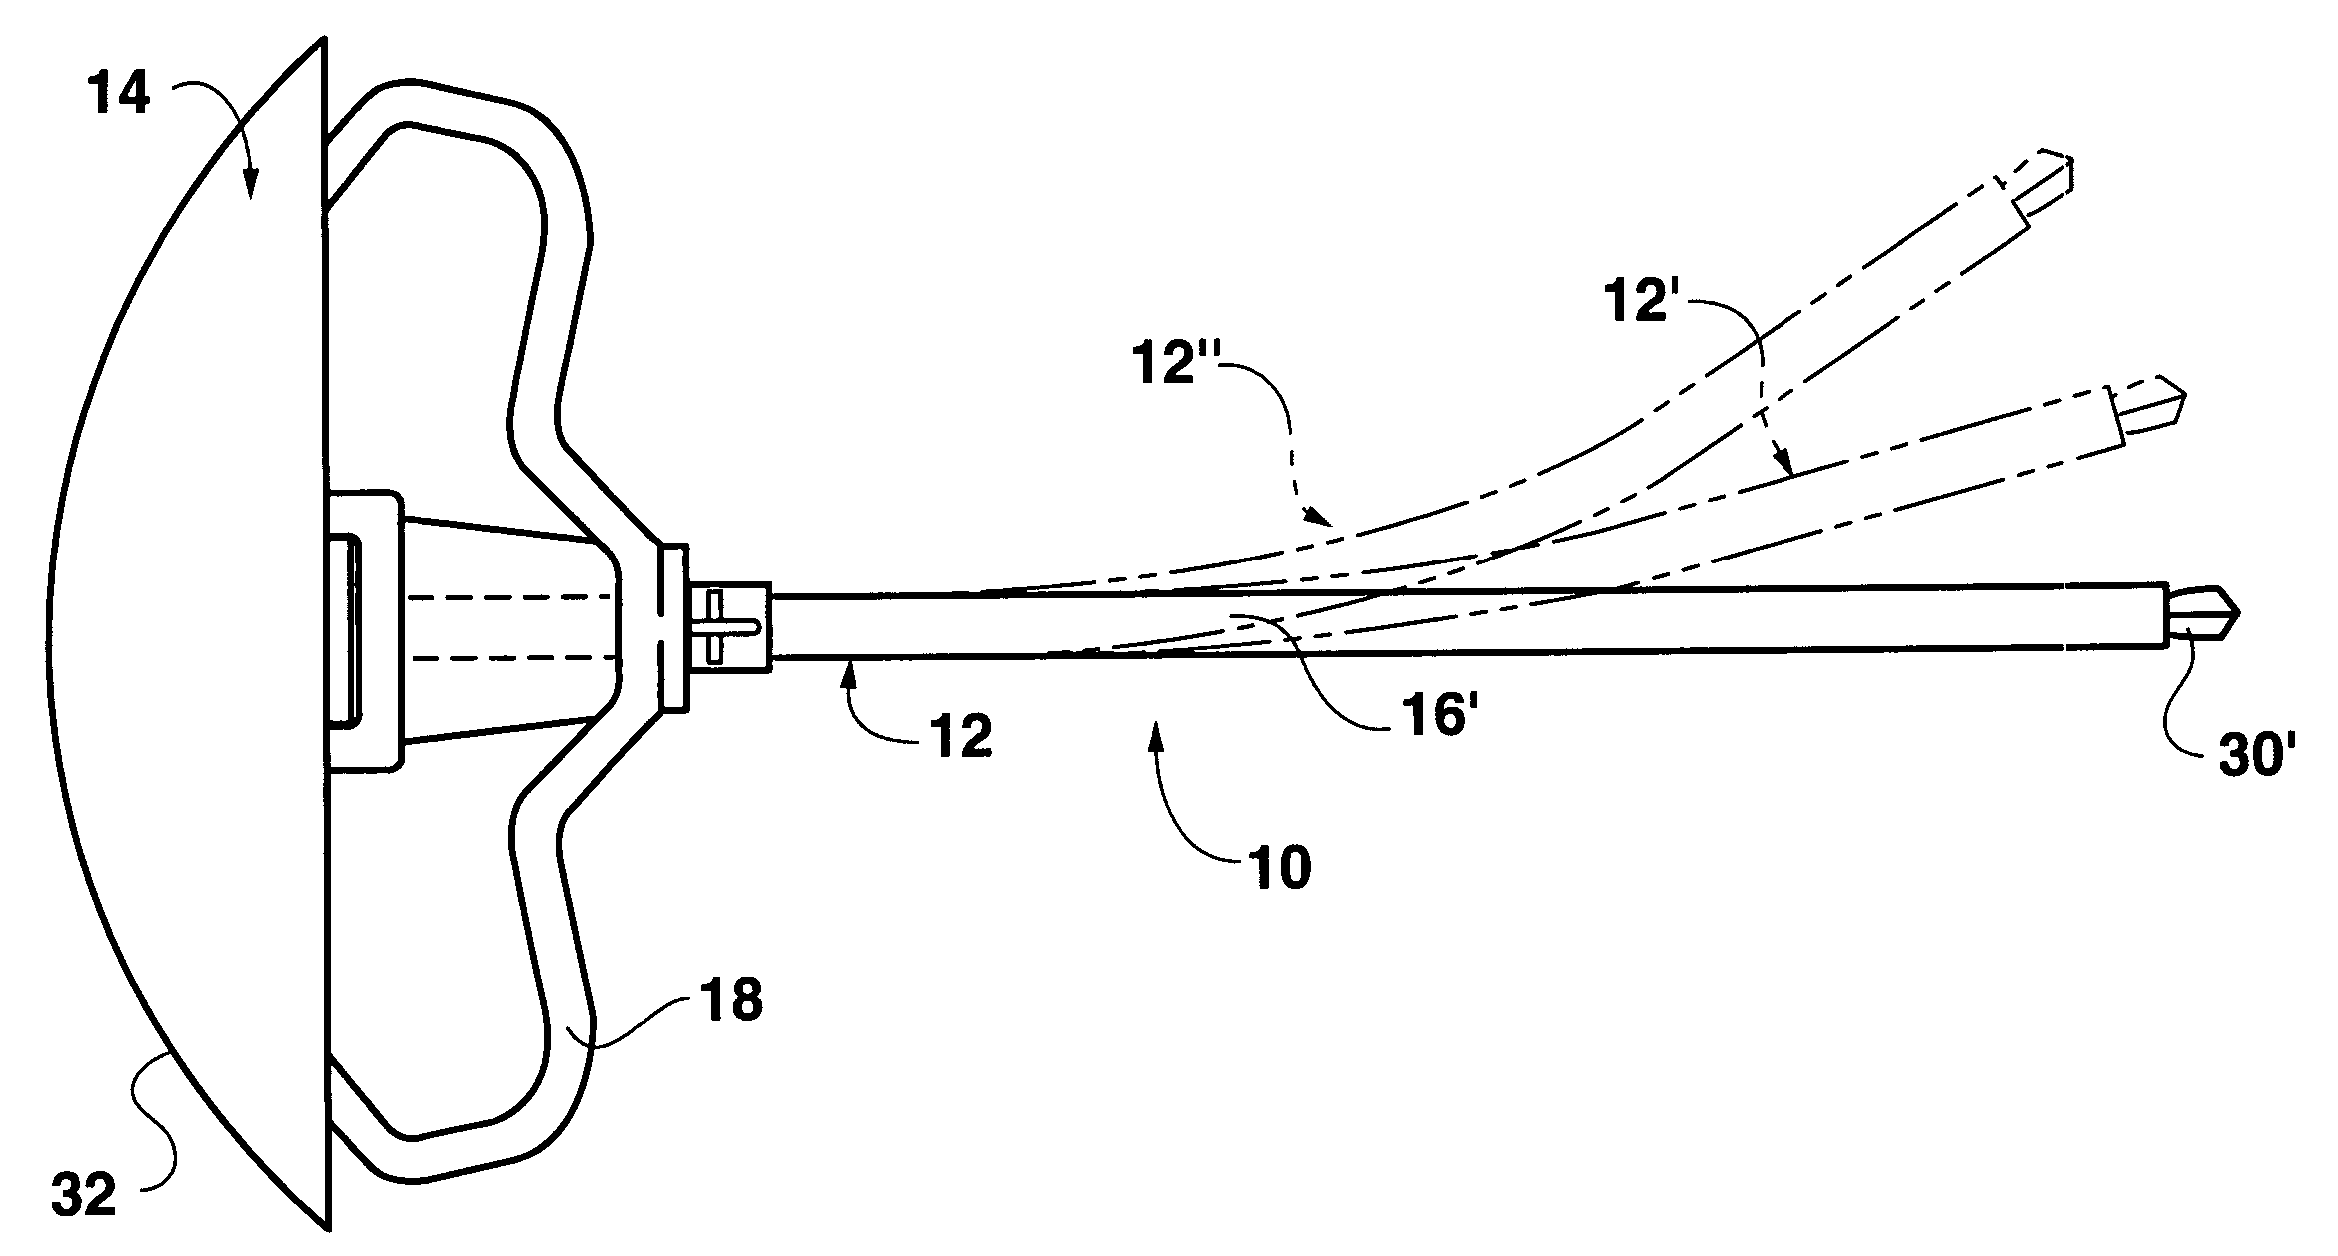 Bendable needle for delivering bone graft material and method of use